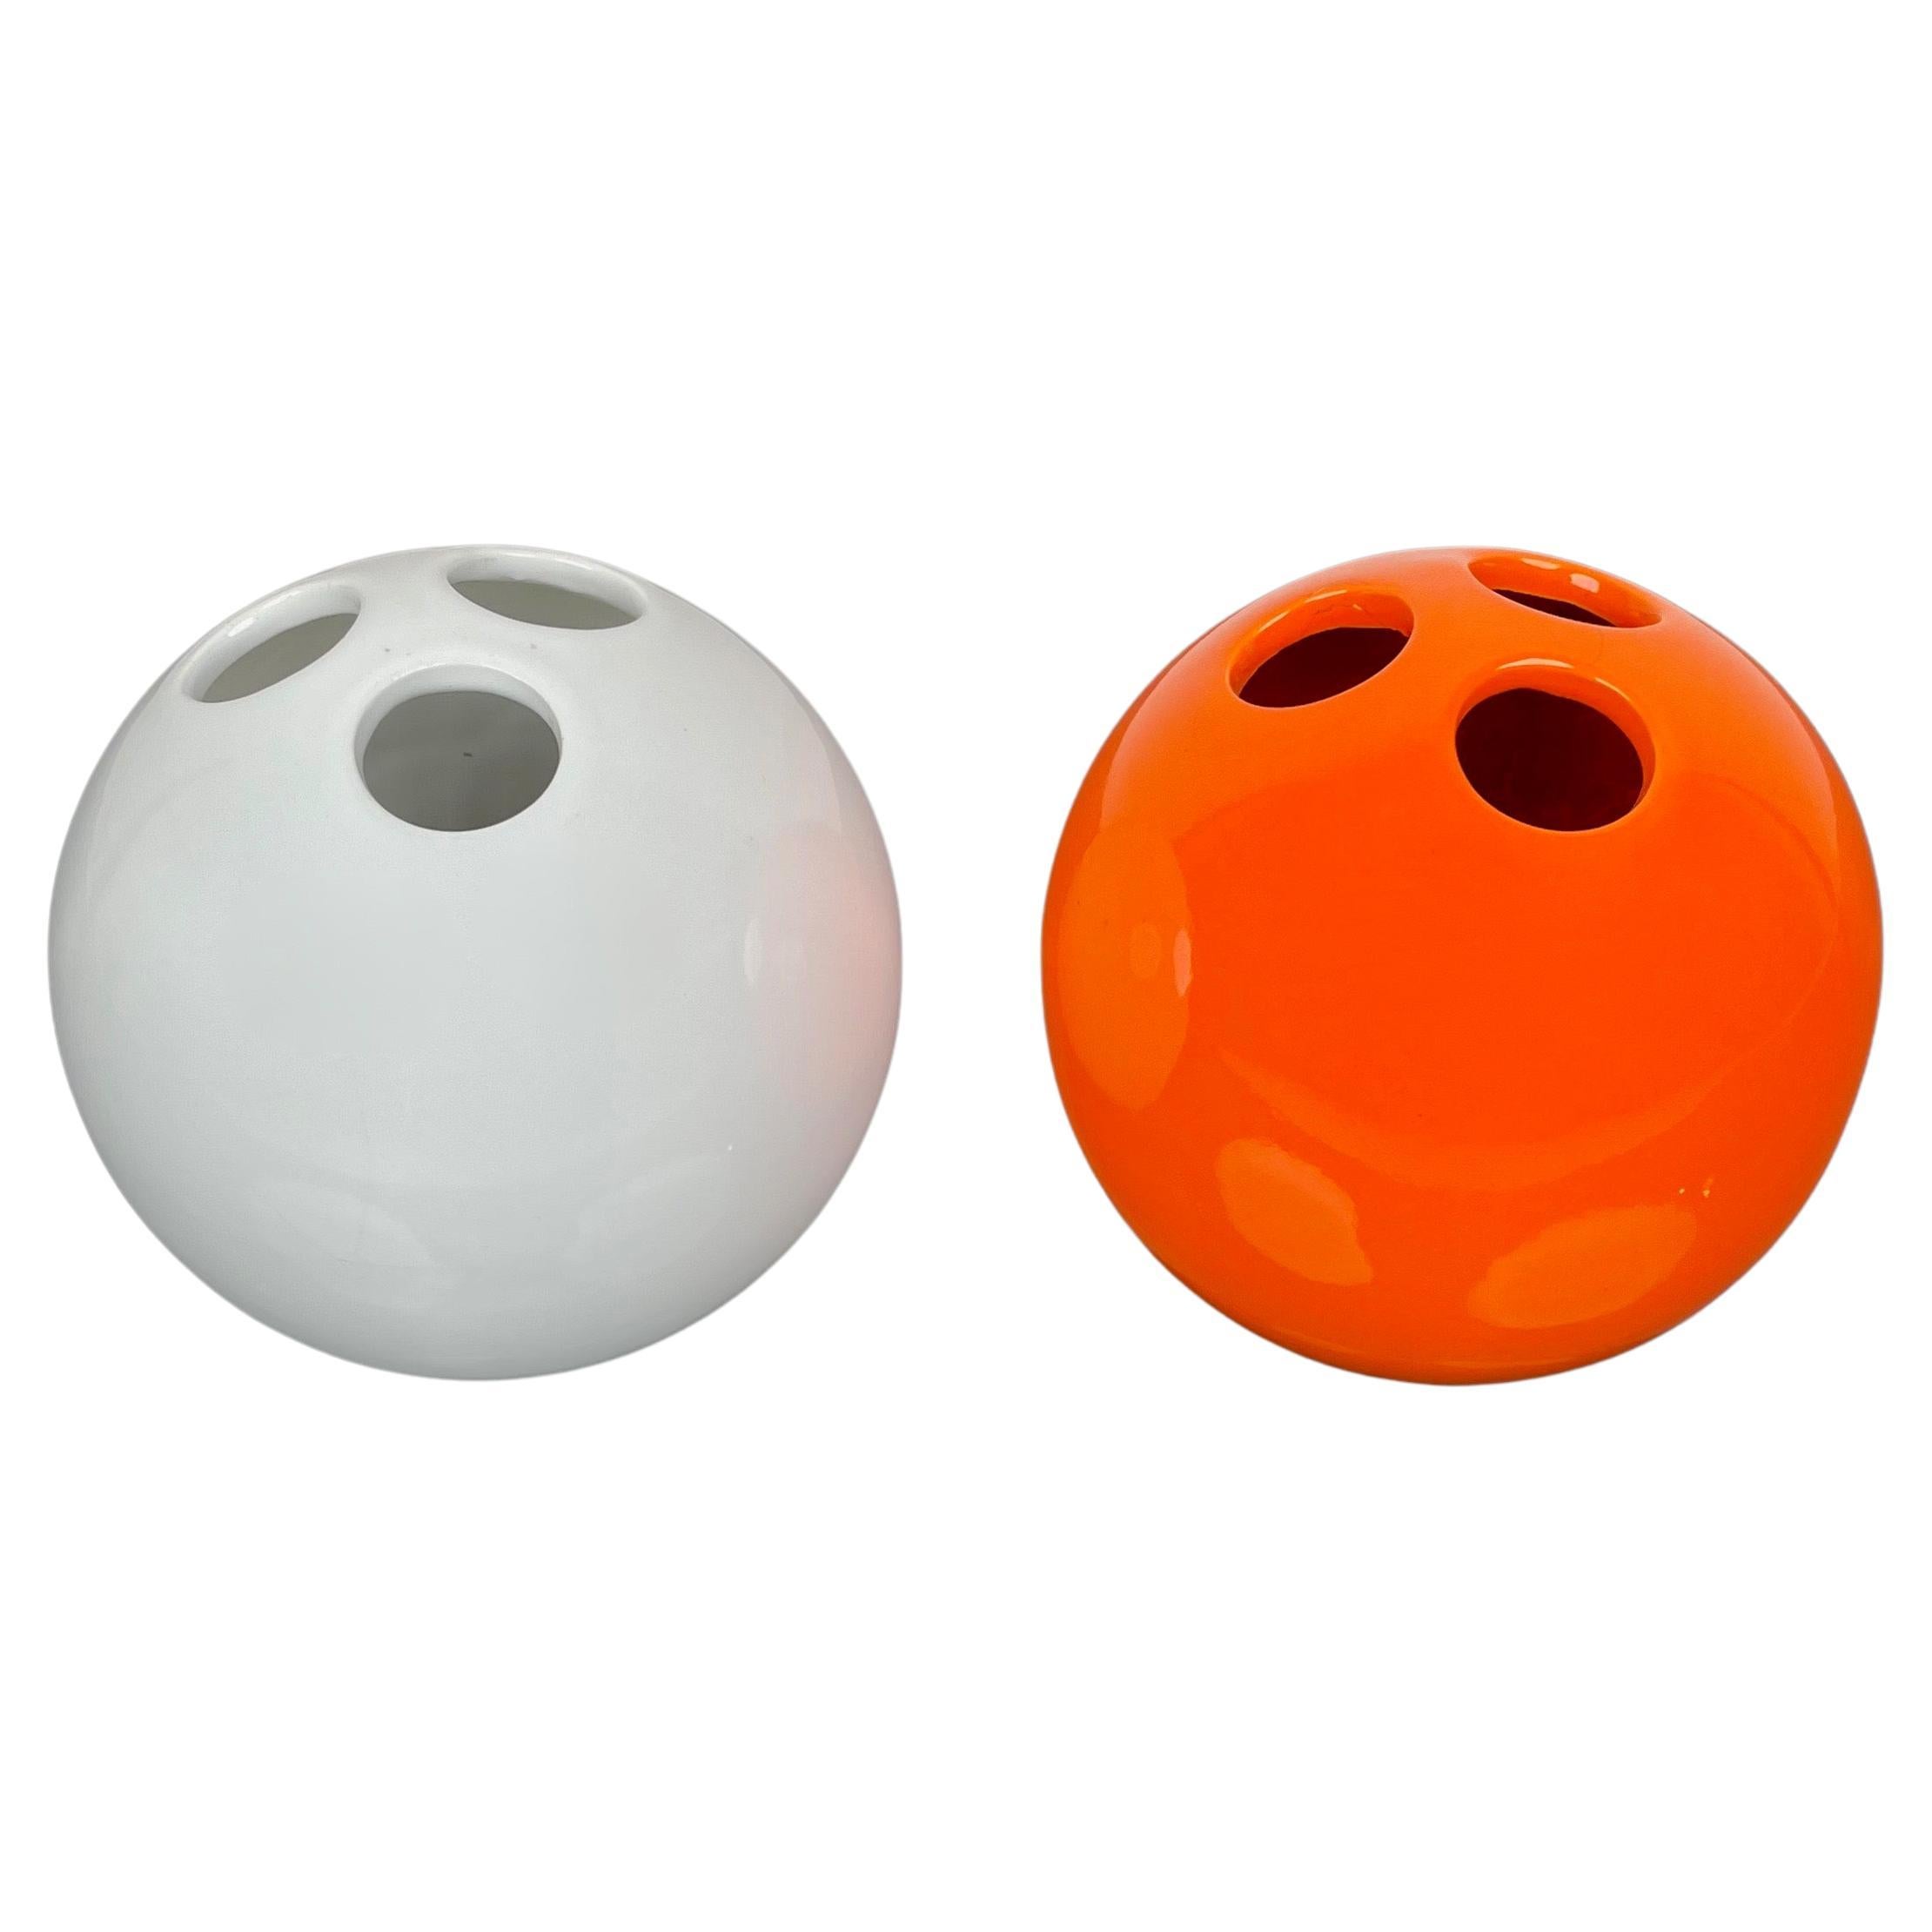 "Bowling Ball" Pair of Orange & White Ceramic Vase by Il Picchio, Italy 1970s For Sale